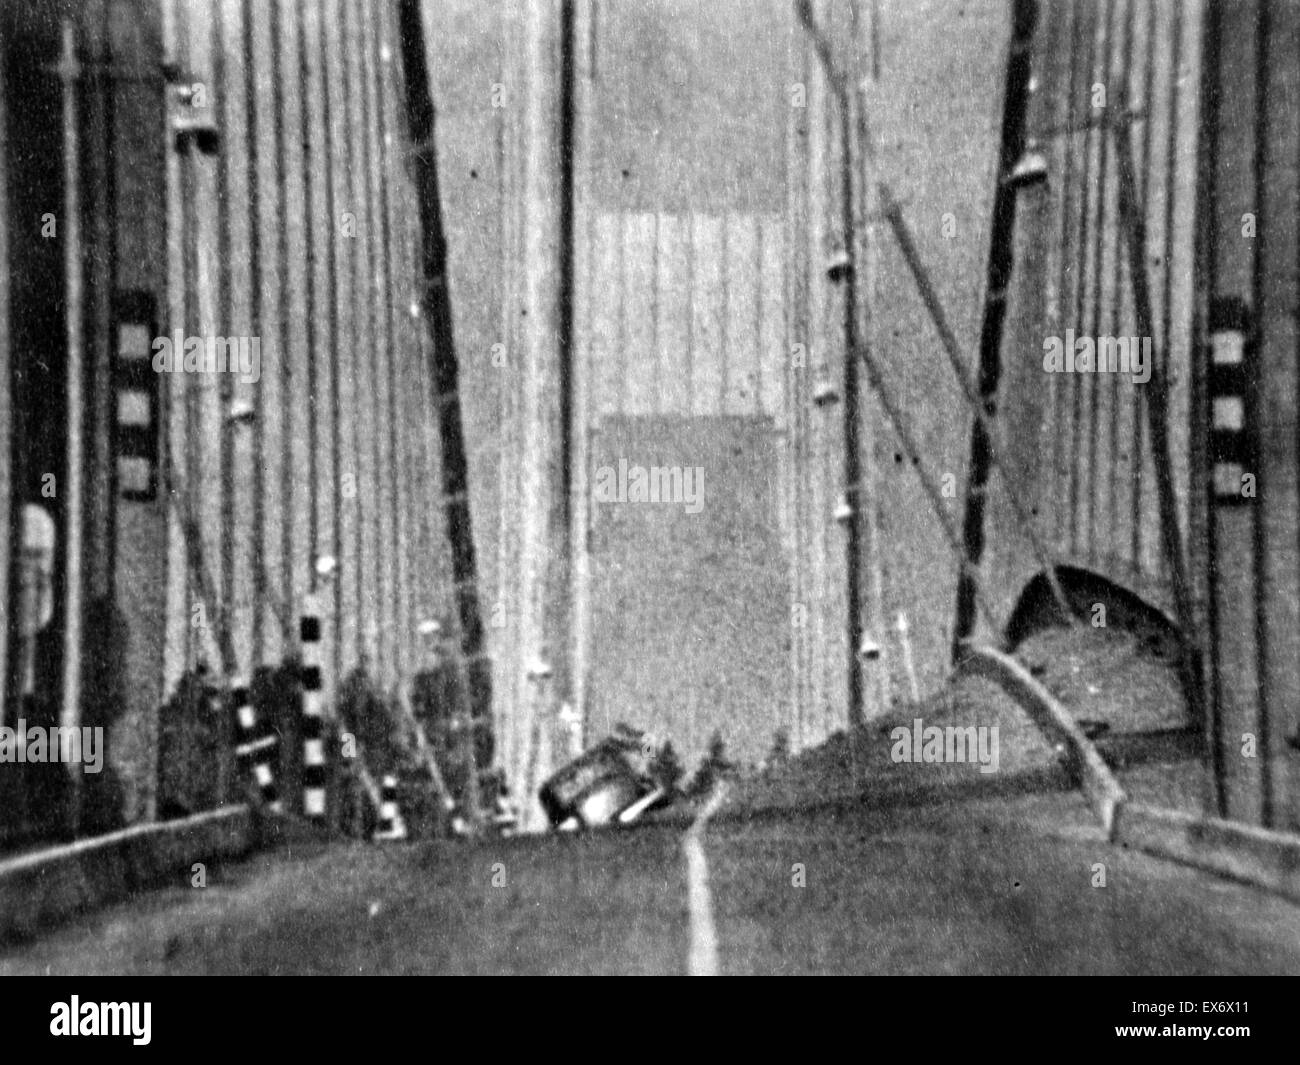 Photographic print of the original Tacoma Narrows Bridge before it's wind induced collapse. The print depicts the physical phenomenon known as aerolastic flutter, which is the dynamic instability of an elastic structure in a fluid flow, caused by positive Stock Photo